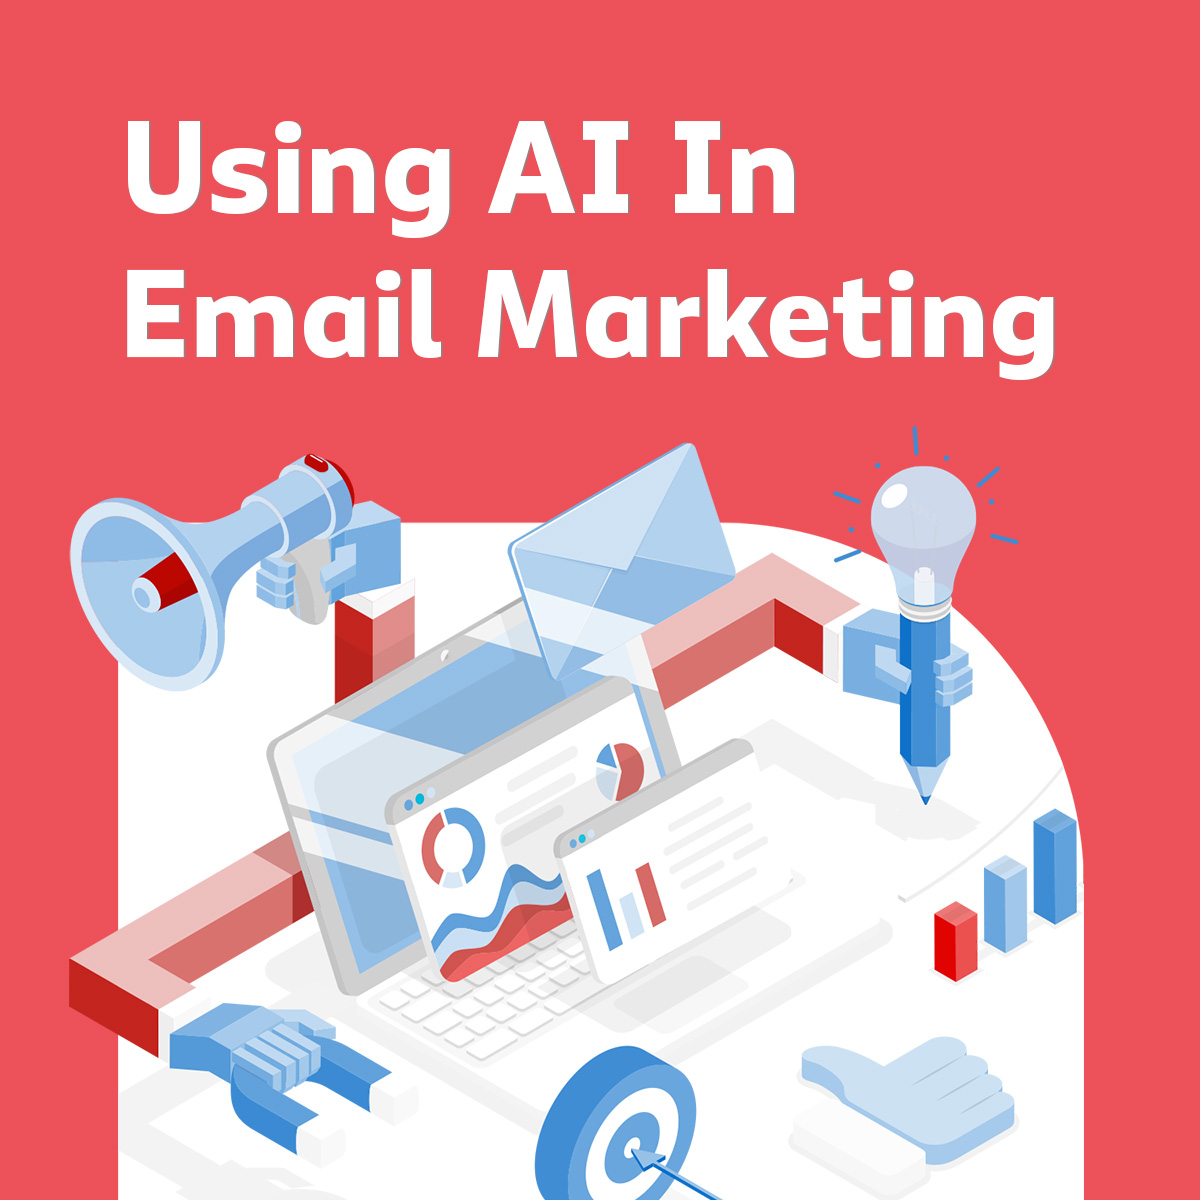 Using AI in email marketing